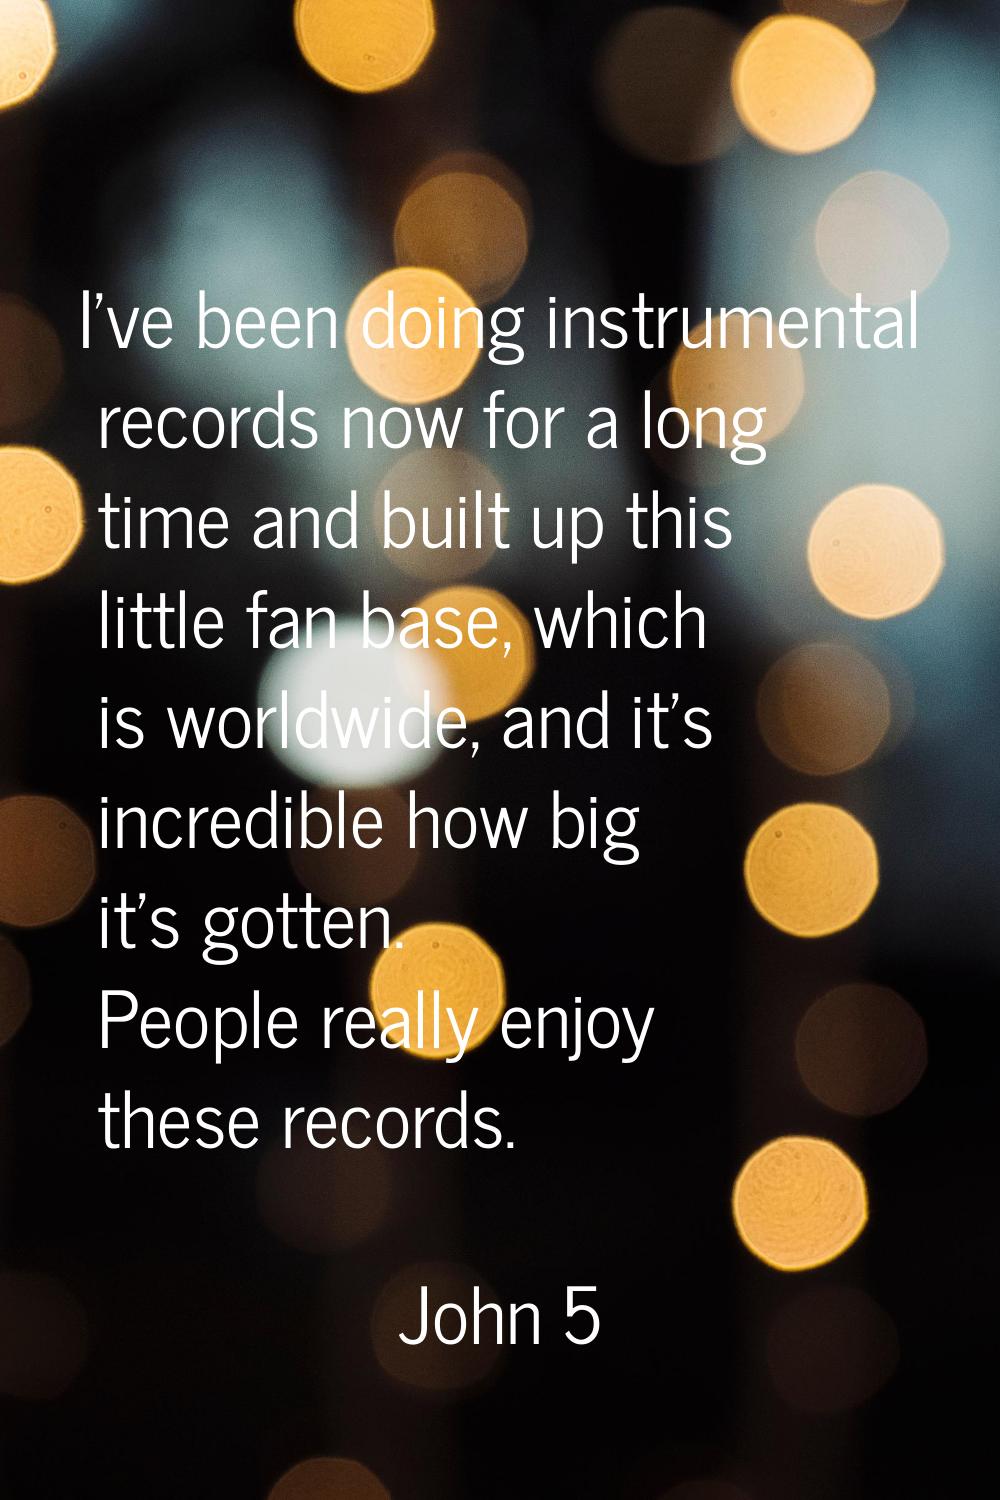 I've been doing instrumental records now for a long time and built up this little fan base, which i